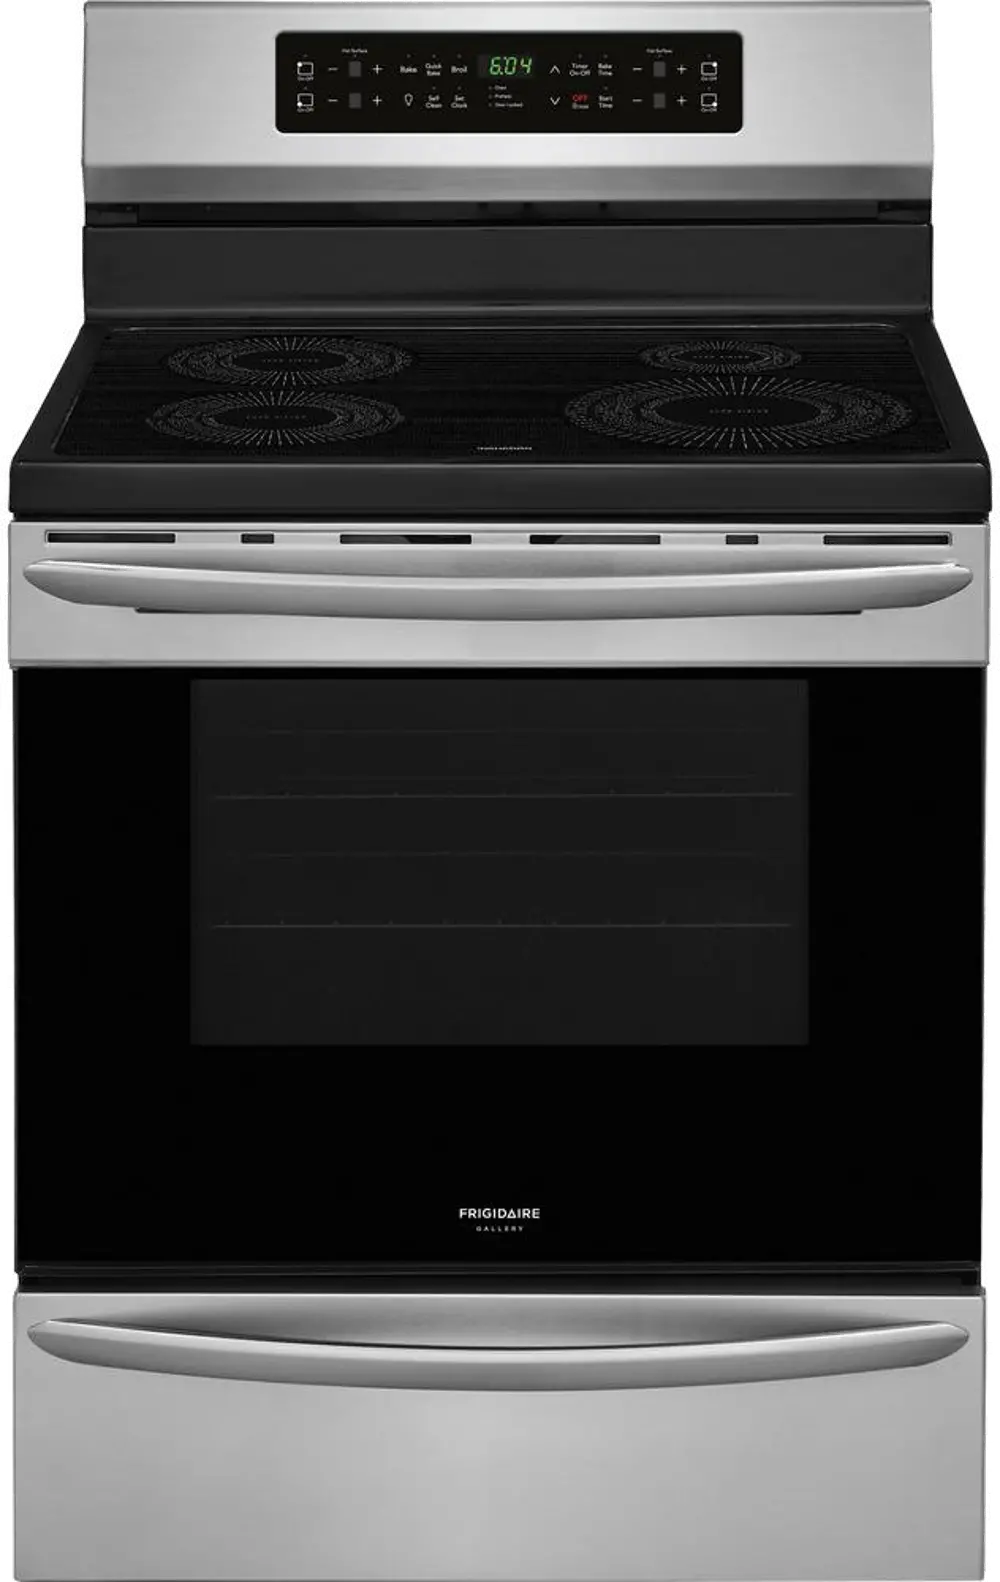 FGIF3036TF Frigidaire Gallery Induction Range - 5.4 cu. ft. Stainless Steel-1